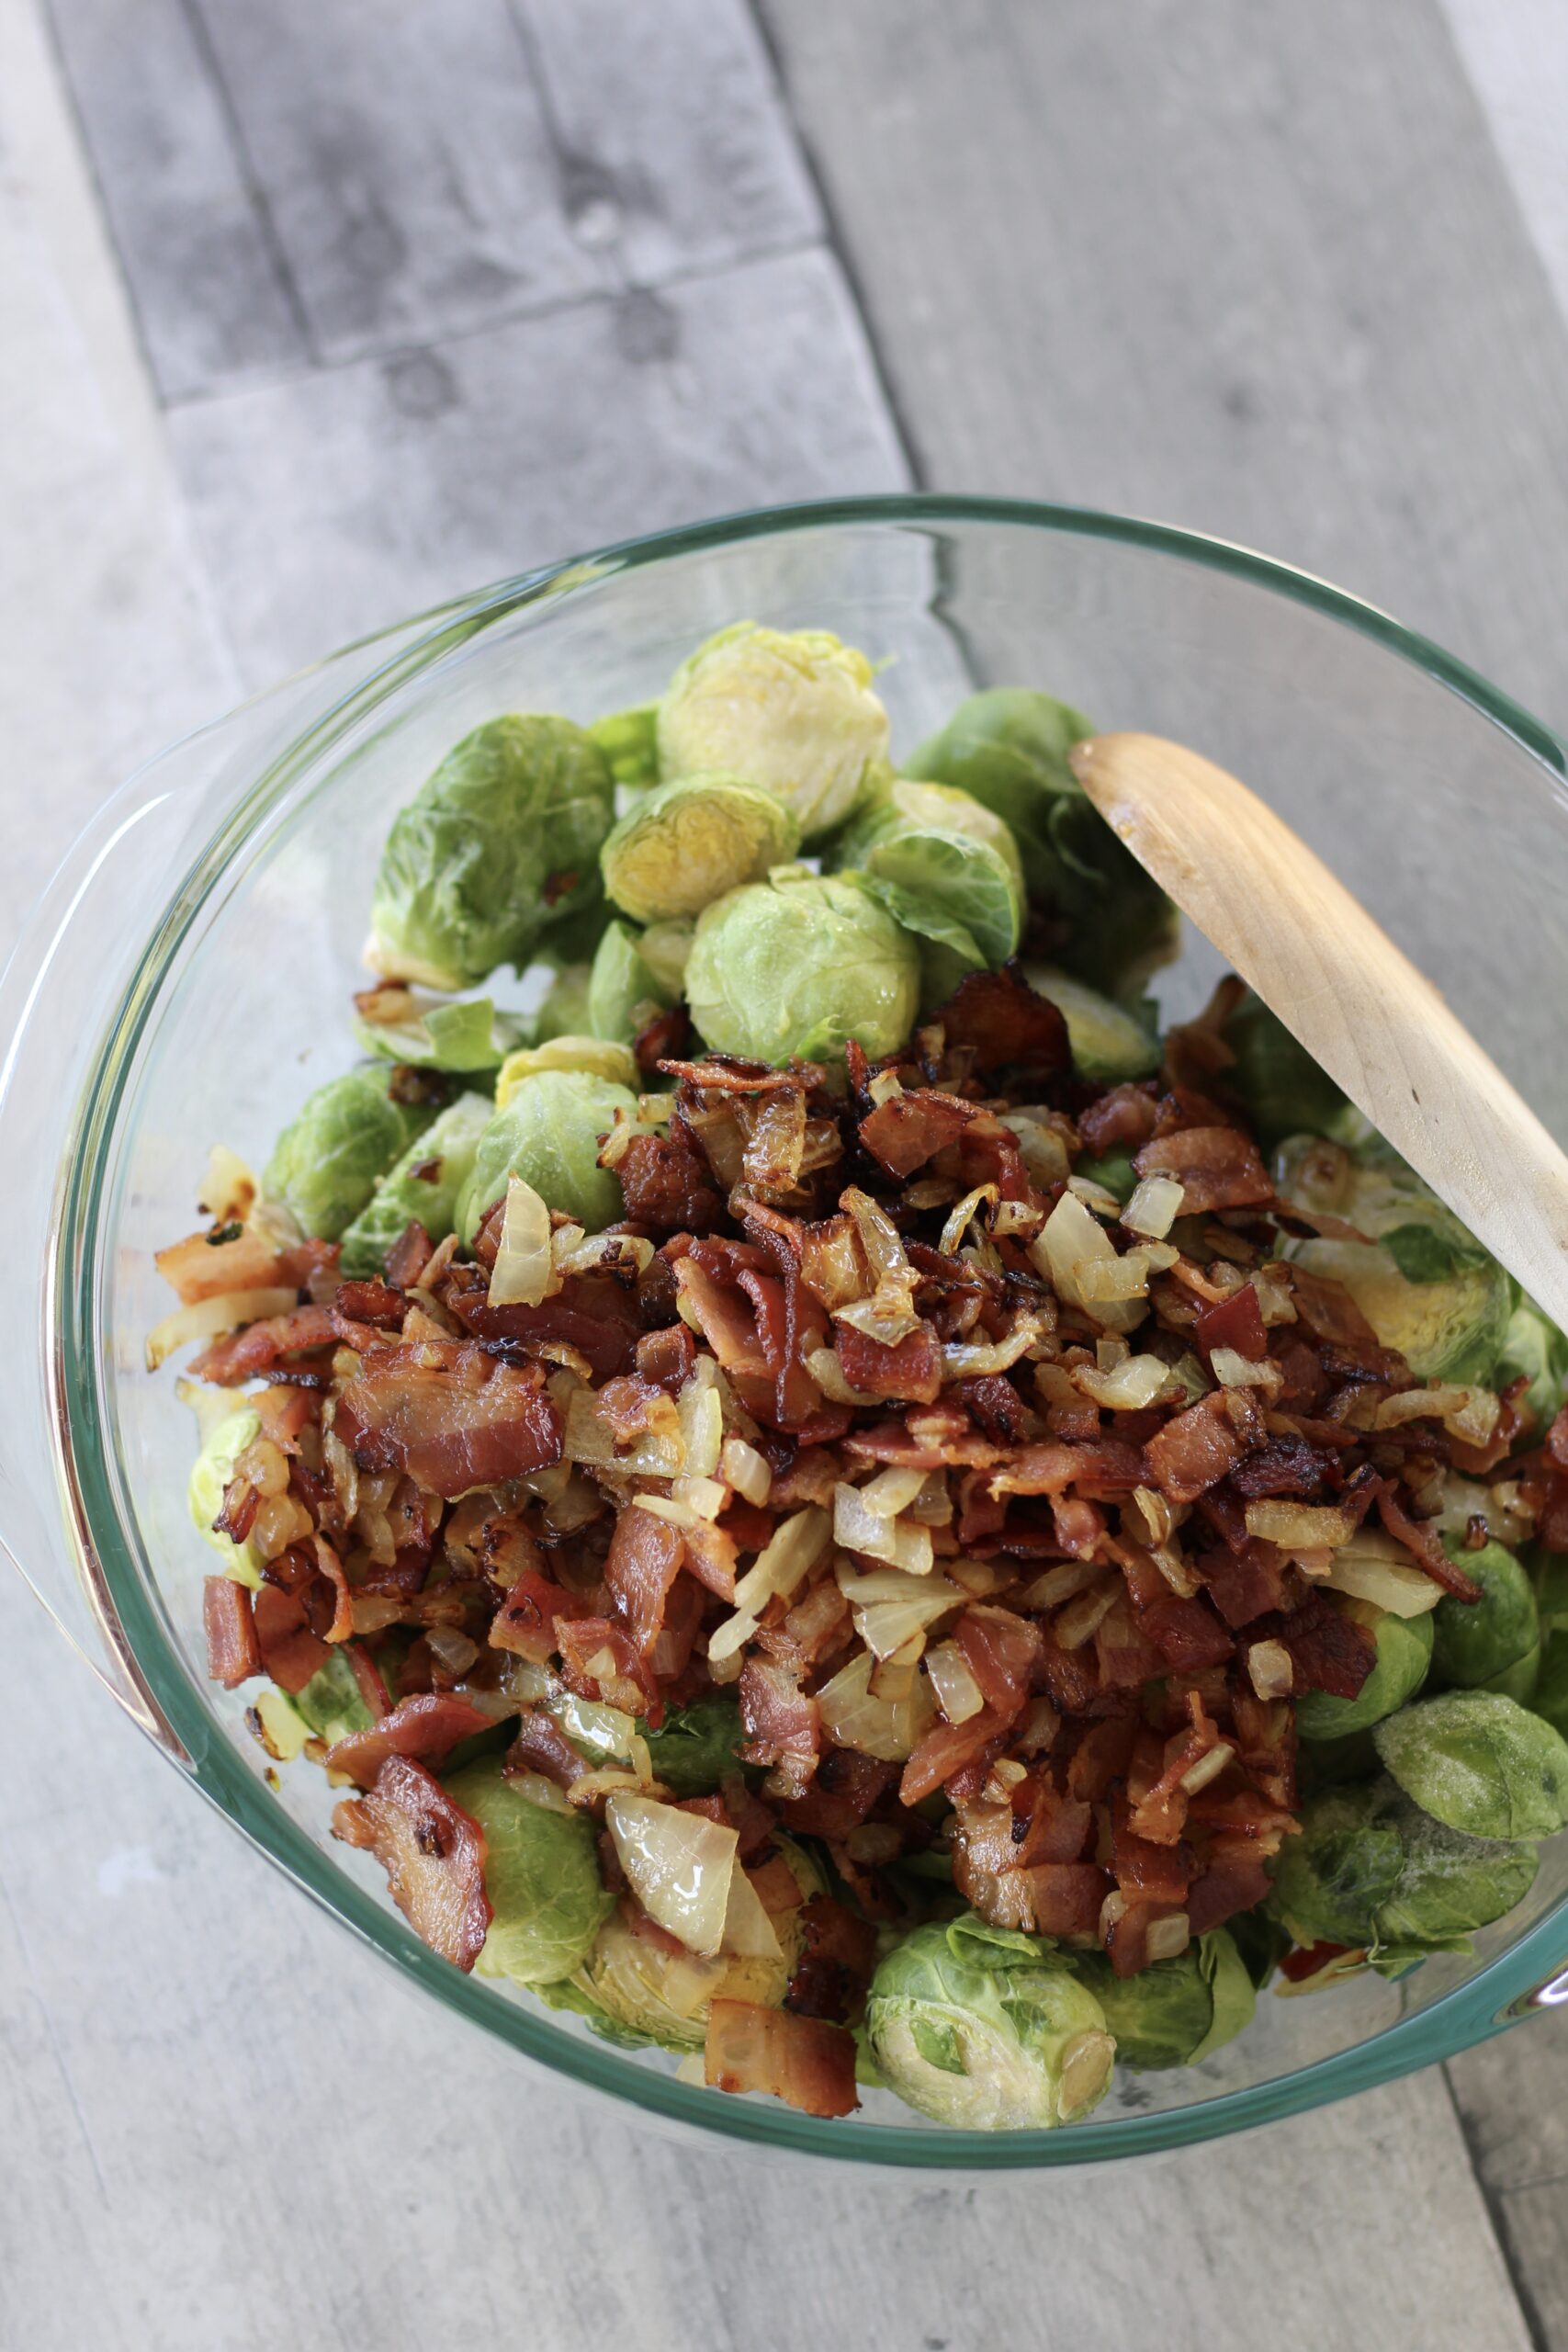 Mix the bacon into the brussel sprouts